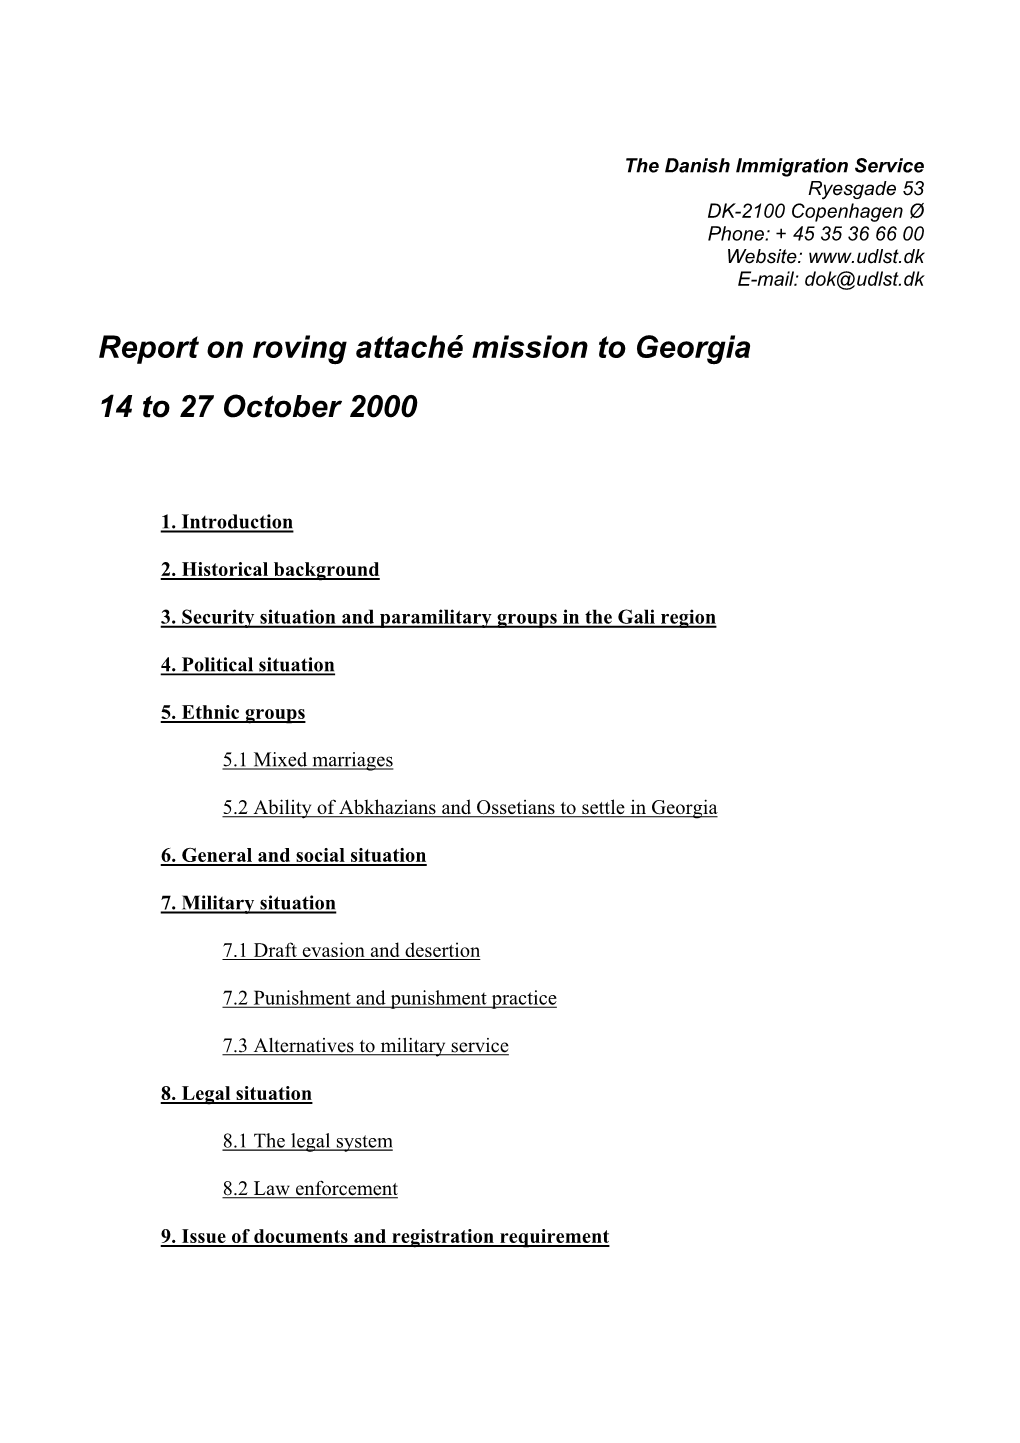 Report on Roving Attaché Mission to Georgia 14 to 27 October 2000